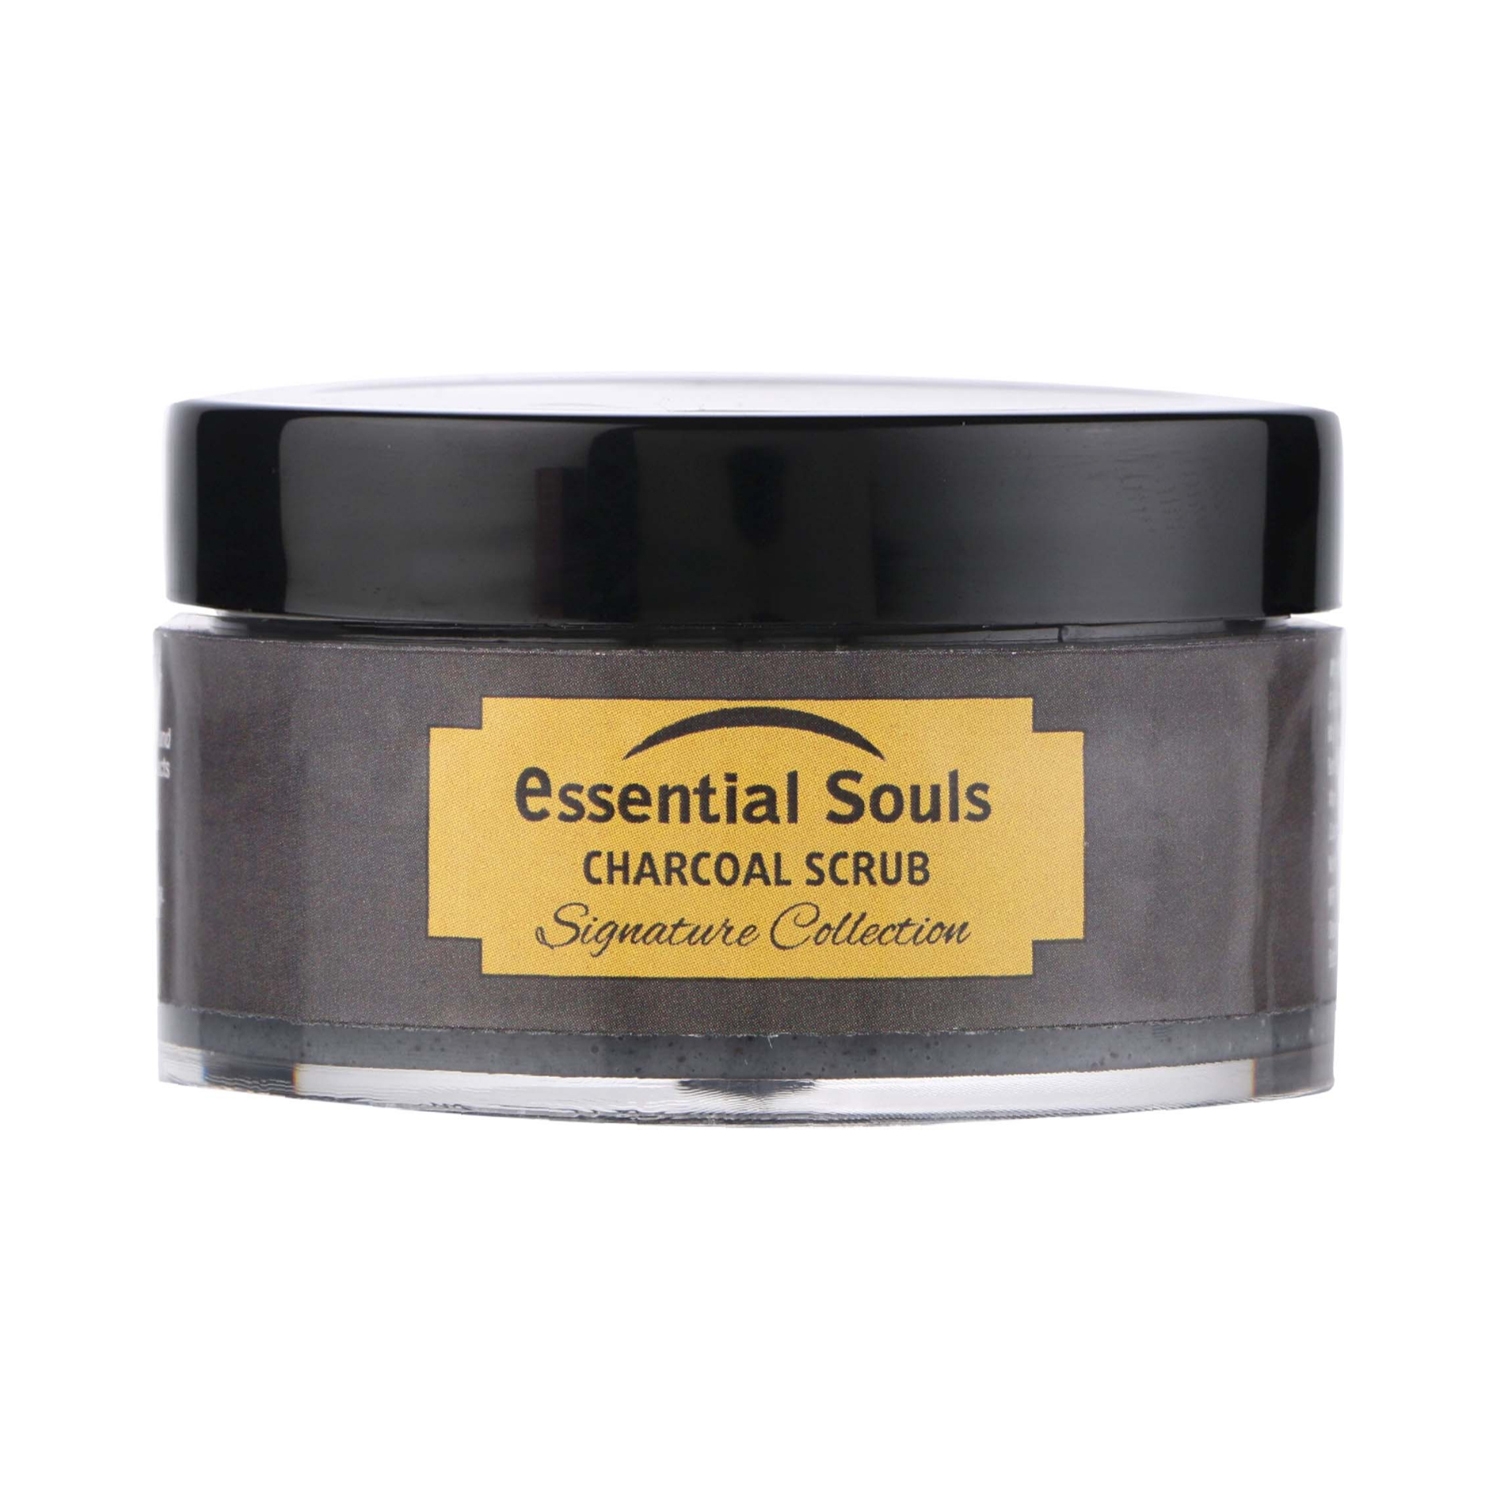 Essential Souls | Essential Souls Signature Collection Charcoal Scrub (50g)